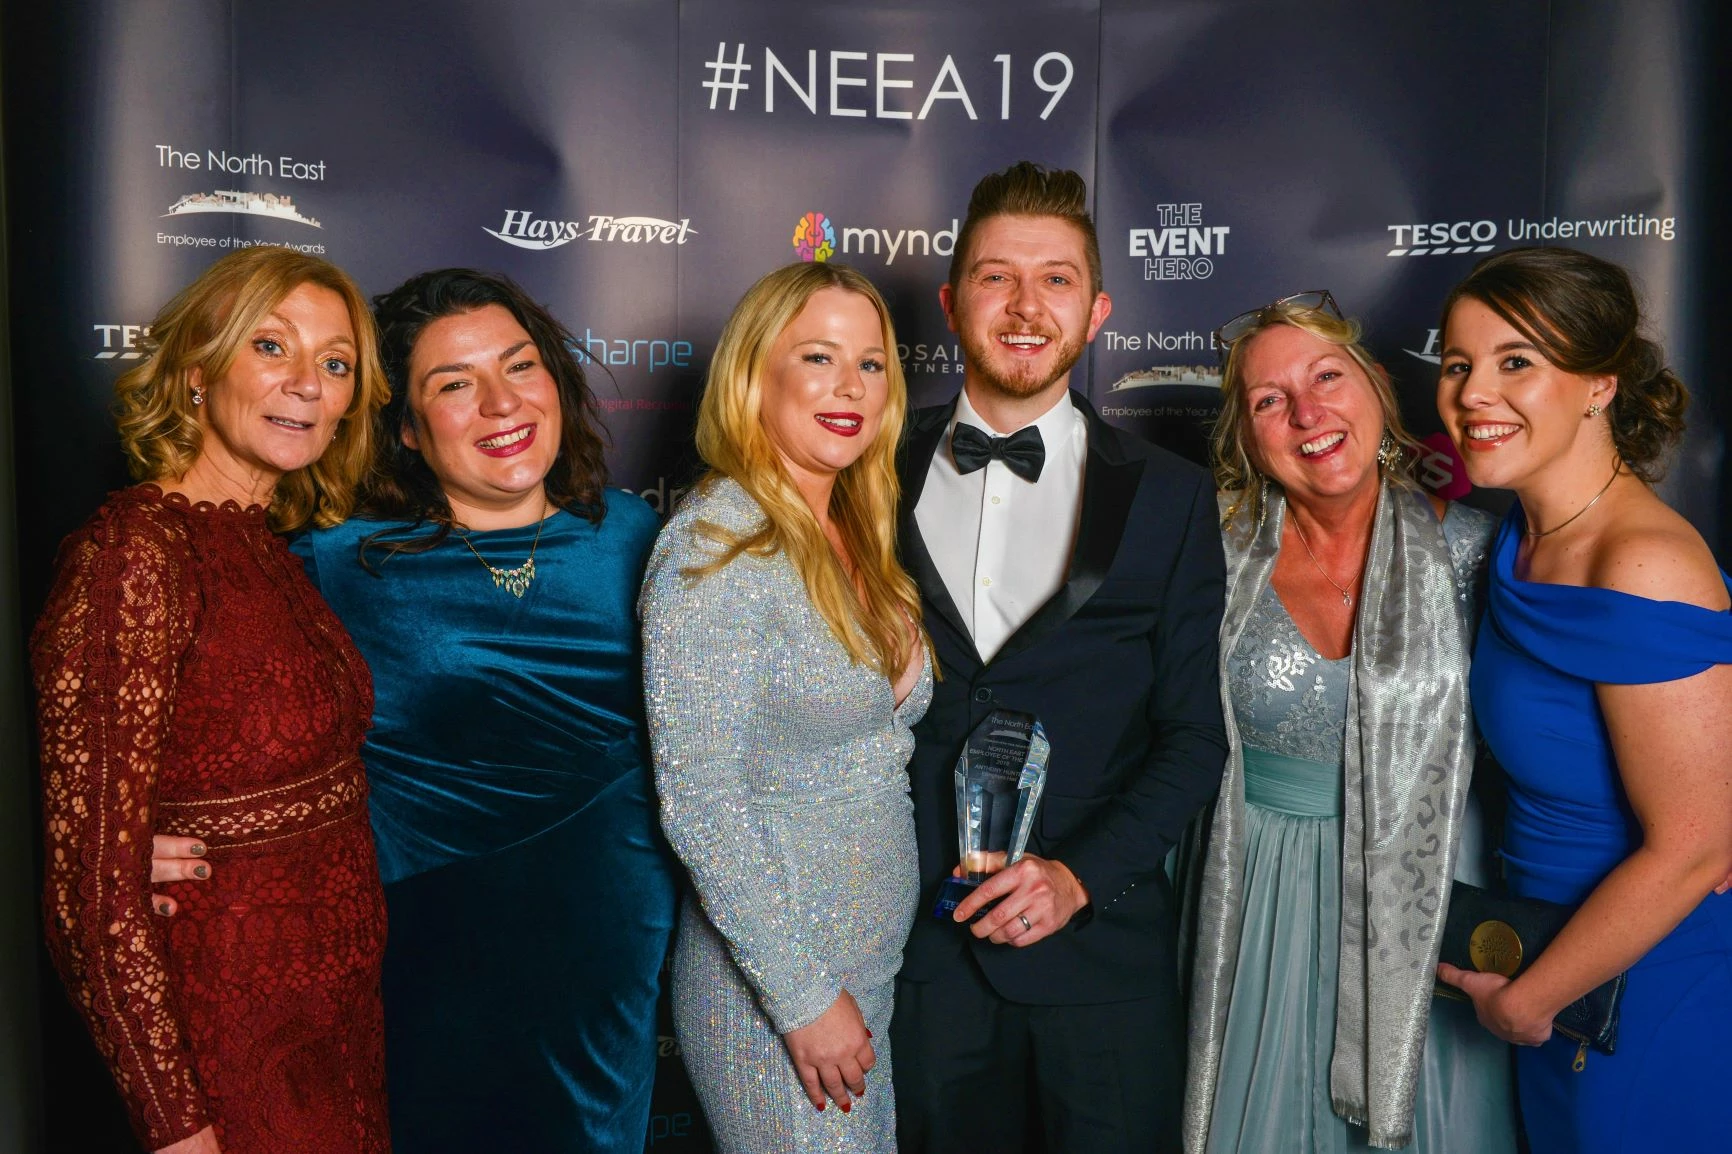 Anthony Hunter - General Manager at Ellingham Hall celebrates with colleages after being named North East Employee of the Year 2019